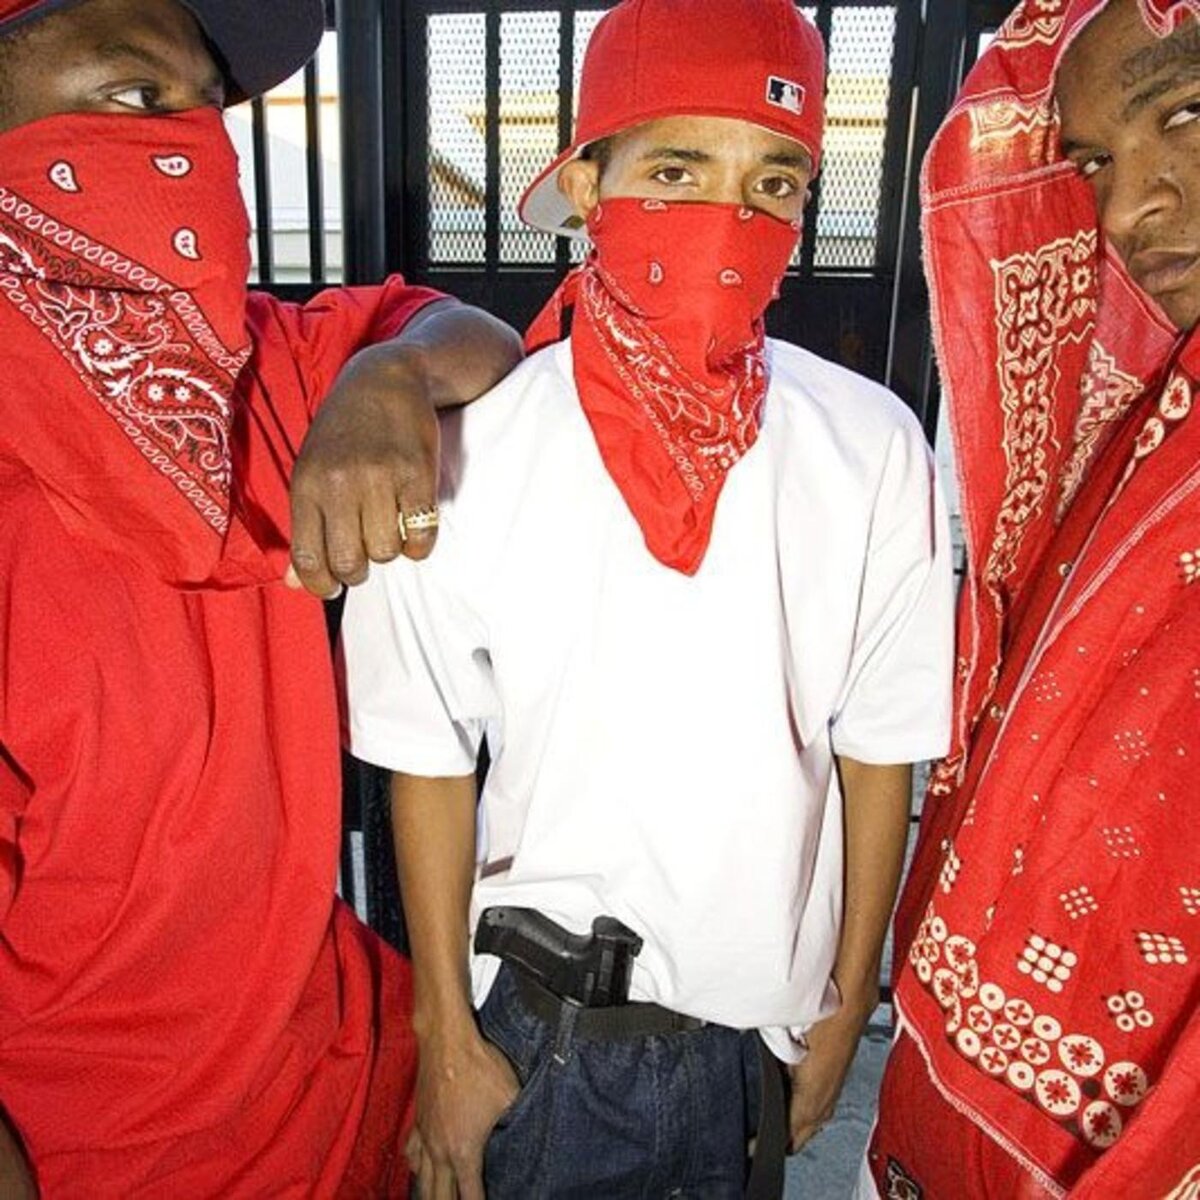 Ghetto style (BLOODS)